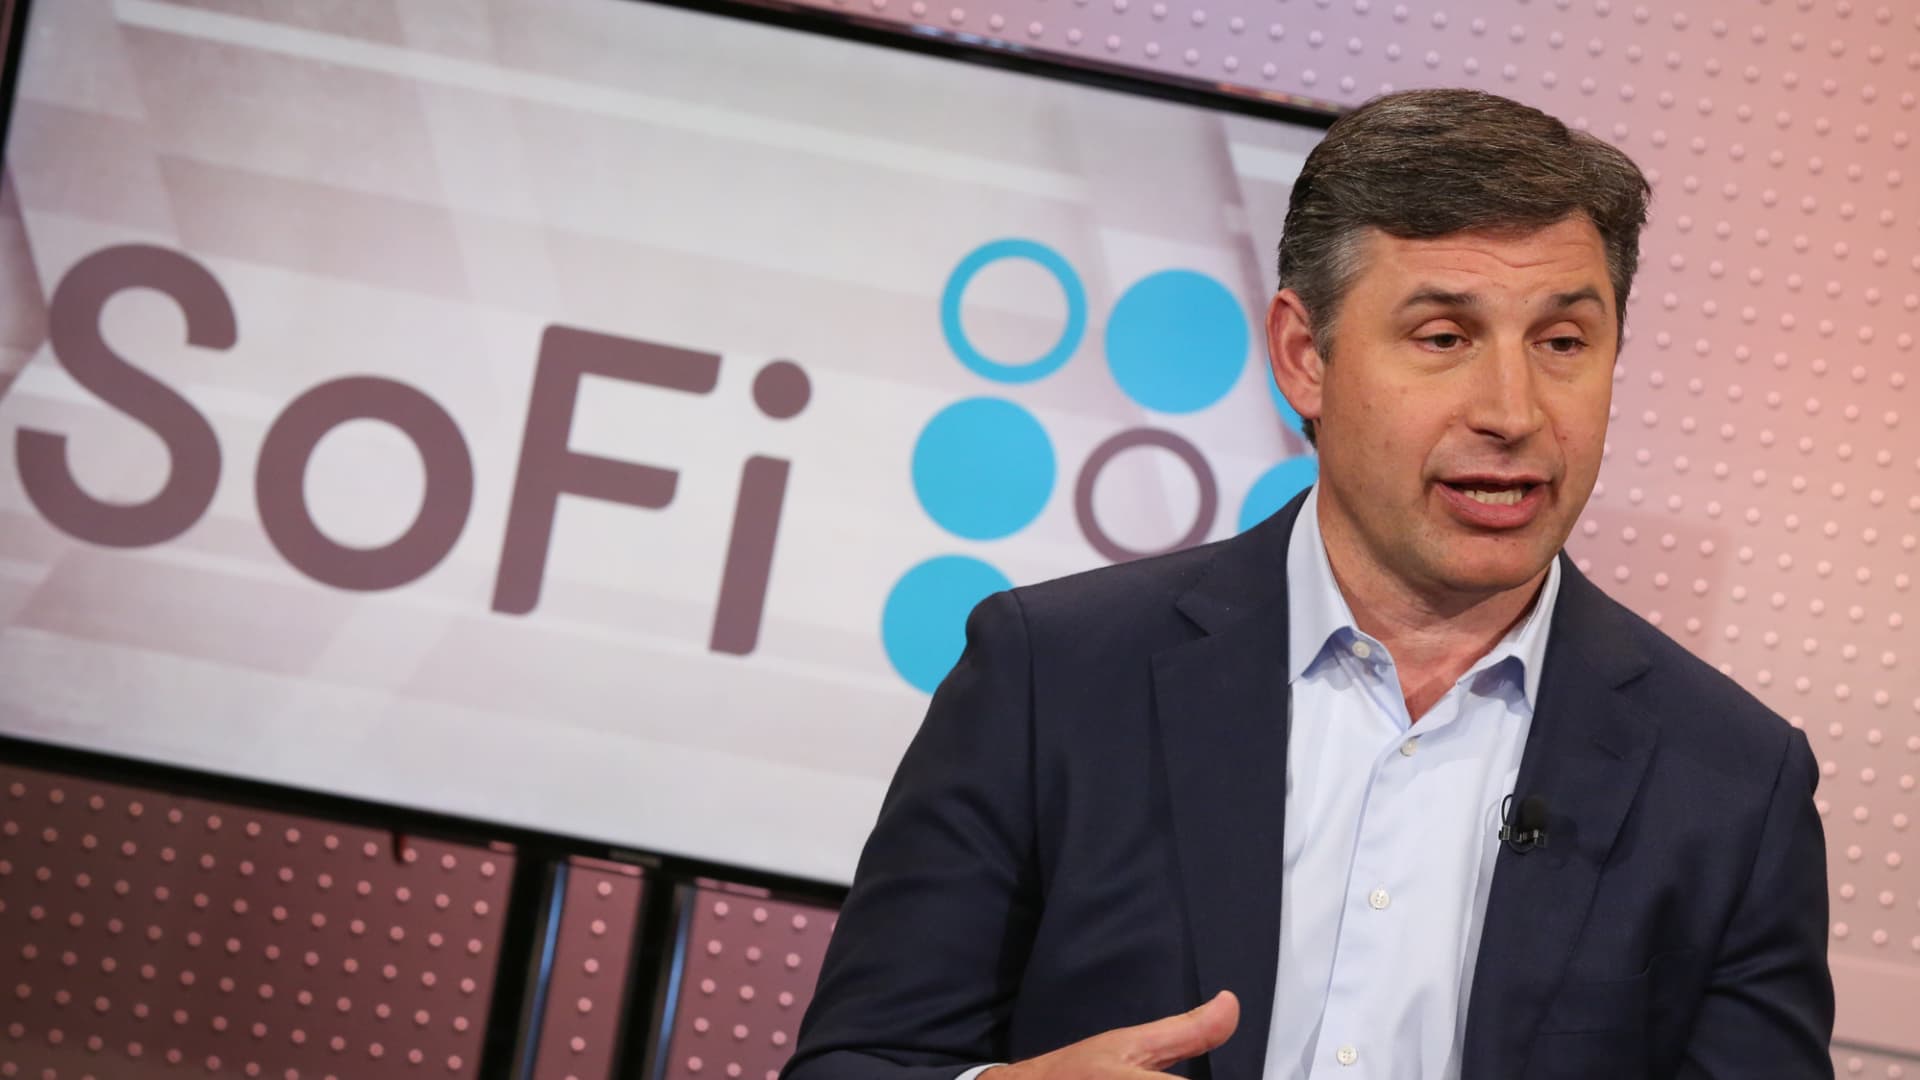 SoFi CEO talks second-quarter growth and ‘stealing share’ from big banks